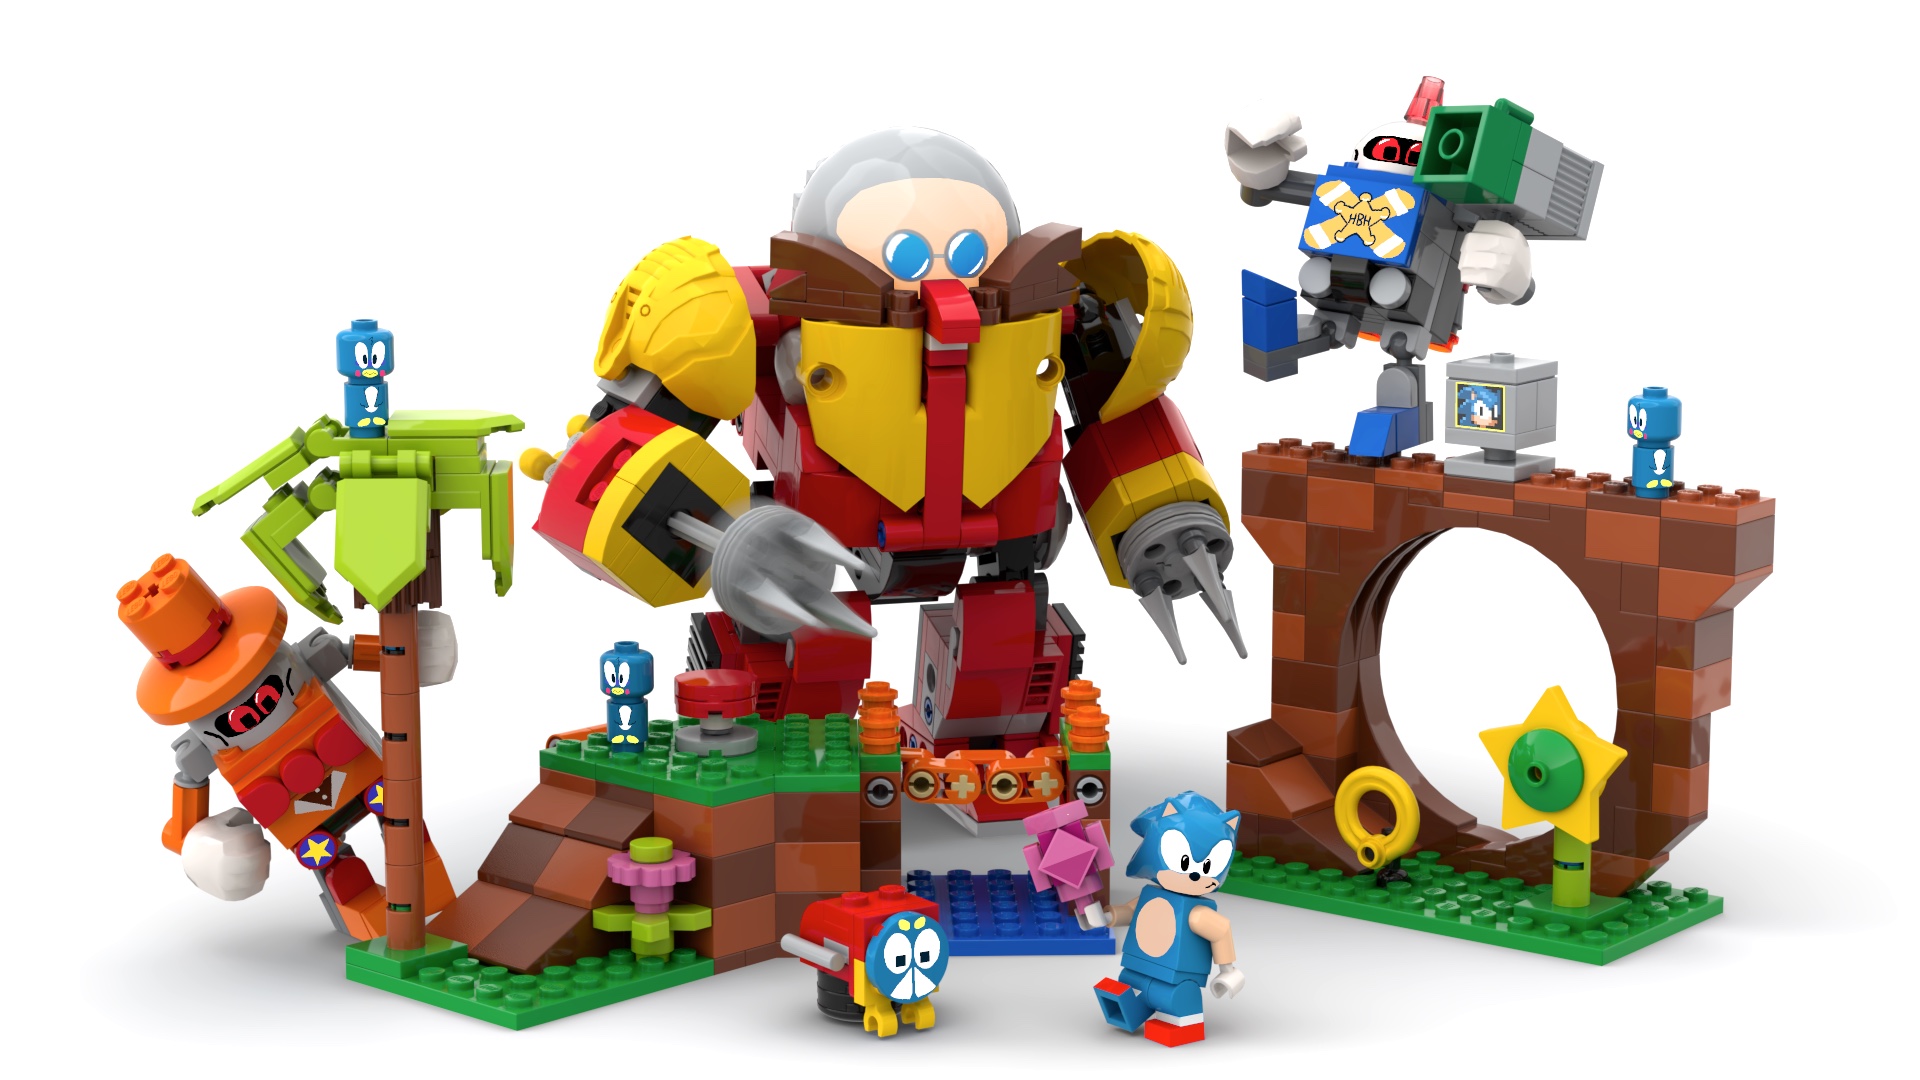 Sonic the Hedgehog fan’s Lego set will get official release